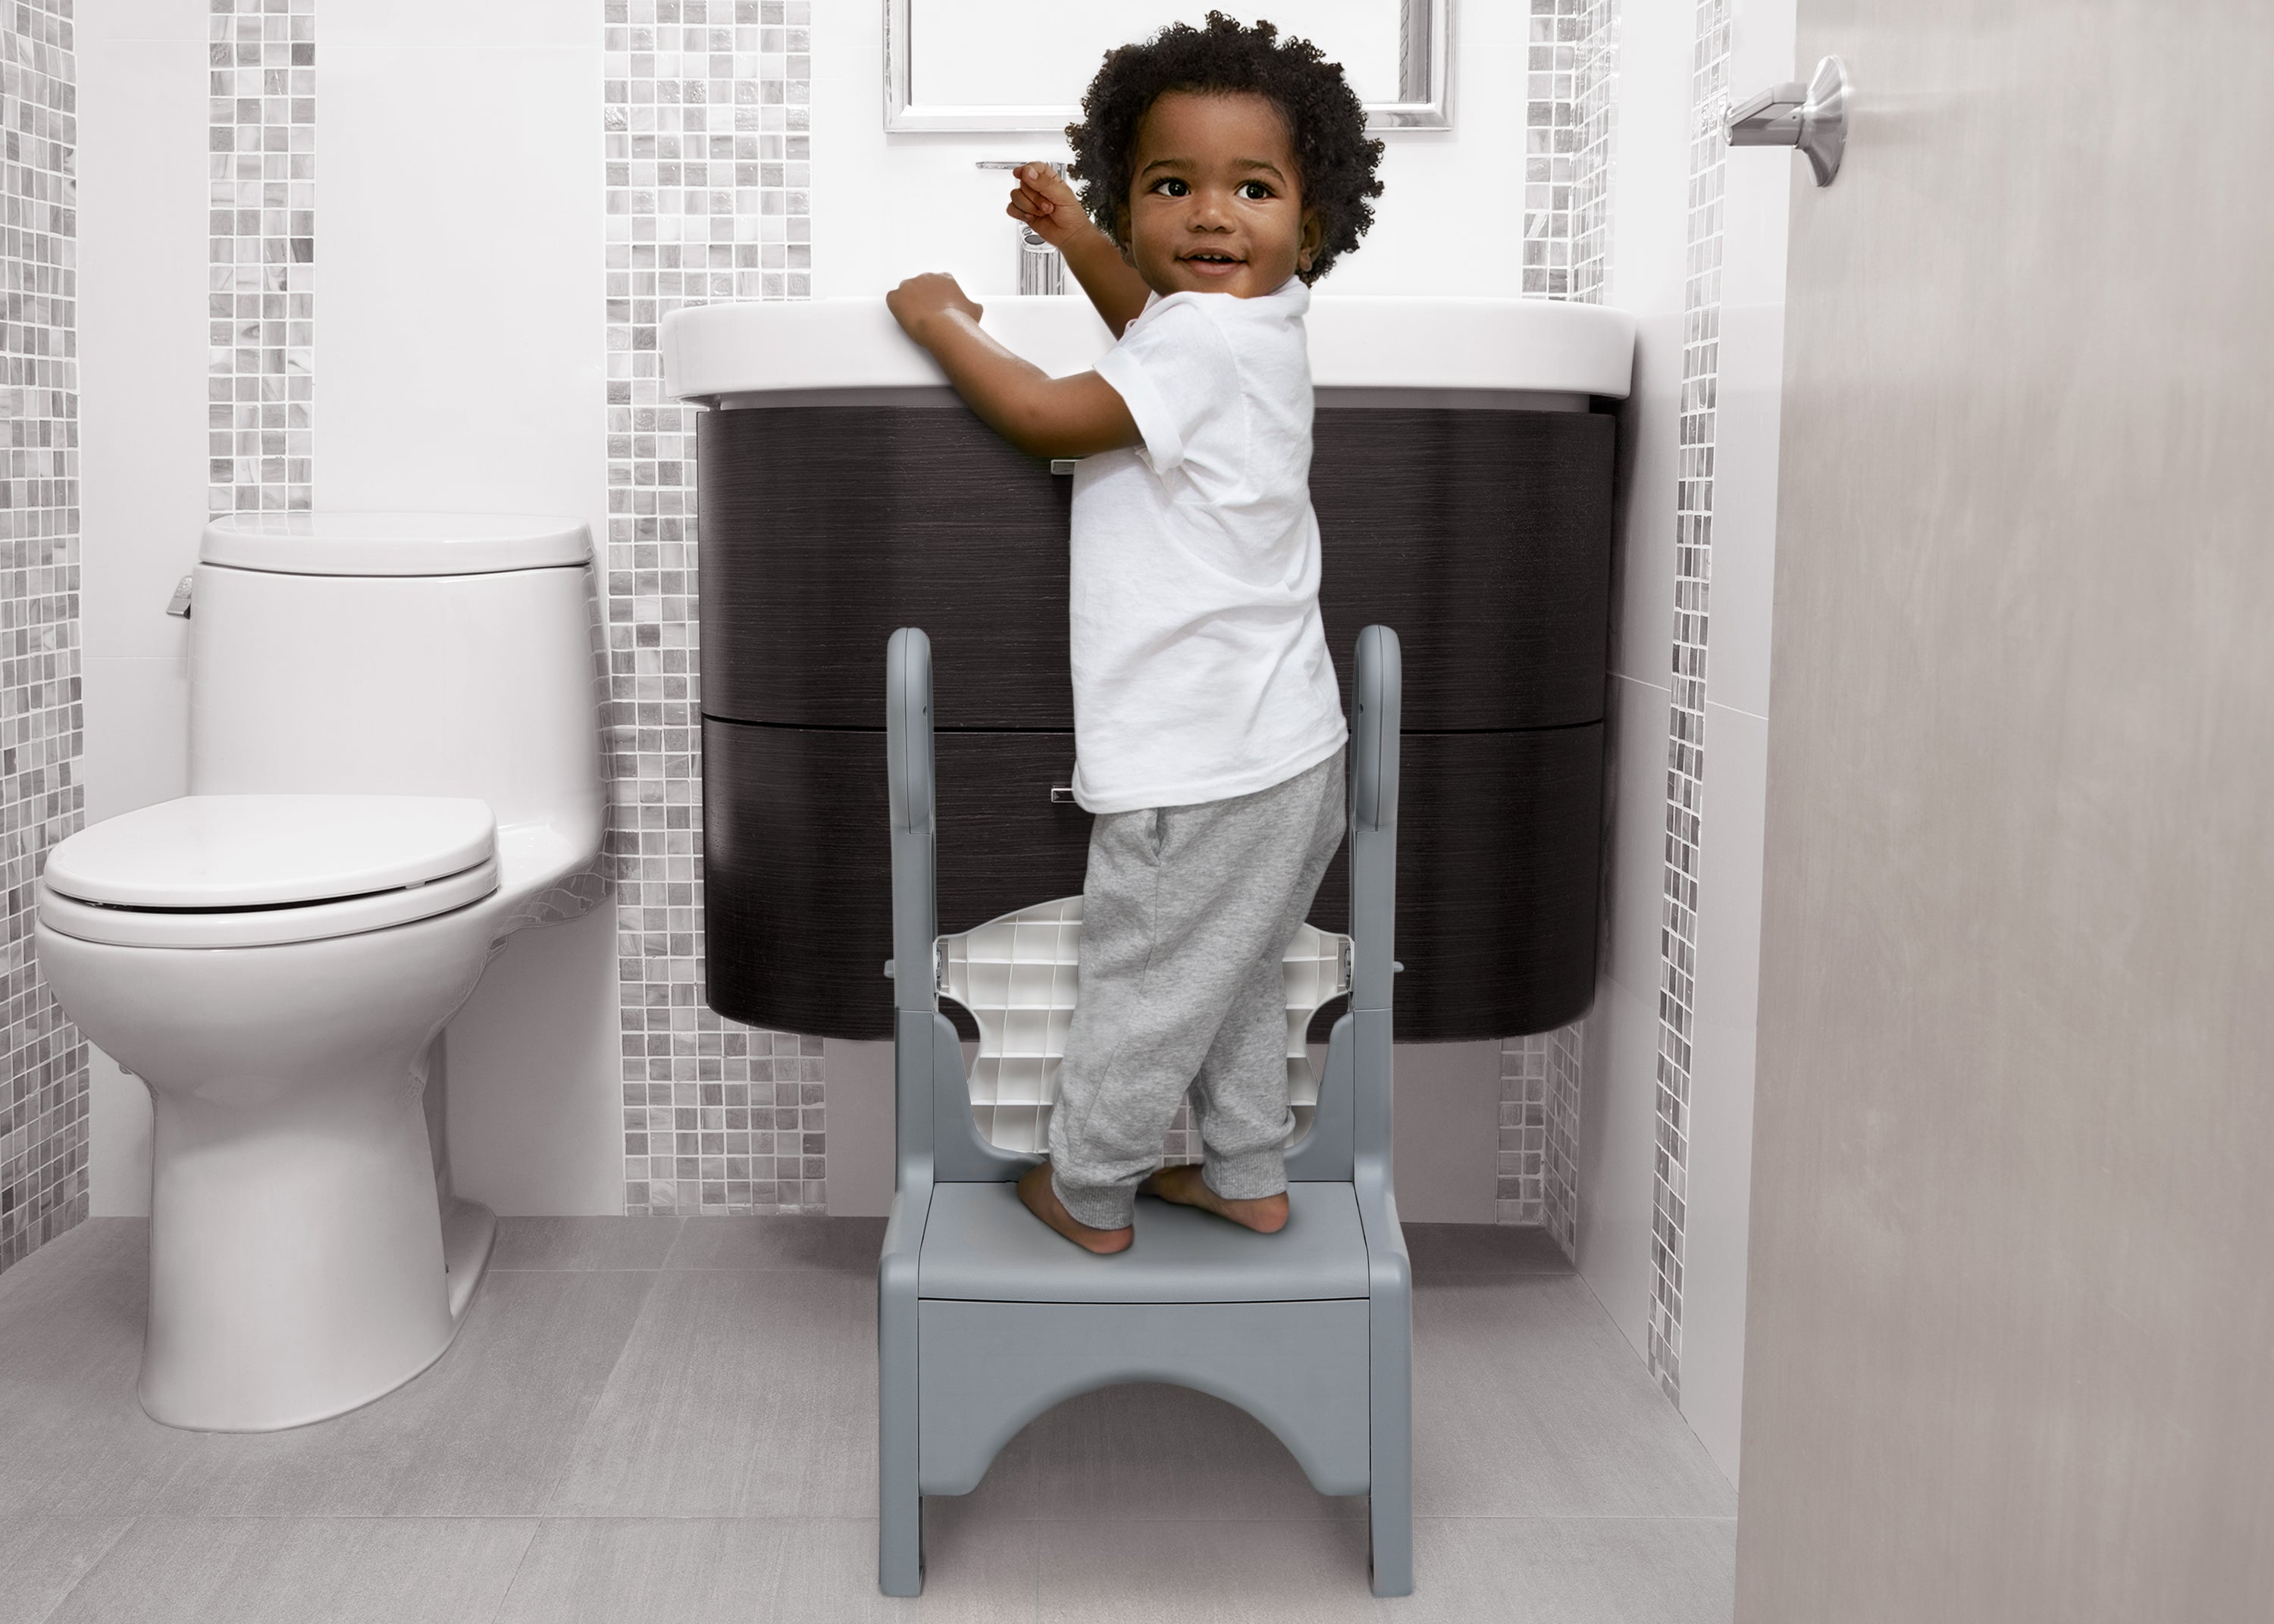 TOBBI Potty Training Seat with Step Stool Ladder Adjustable Toddler Toilet  TH17W0154 - The Home Depot